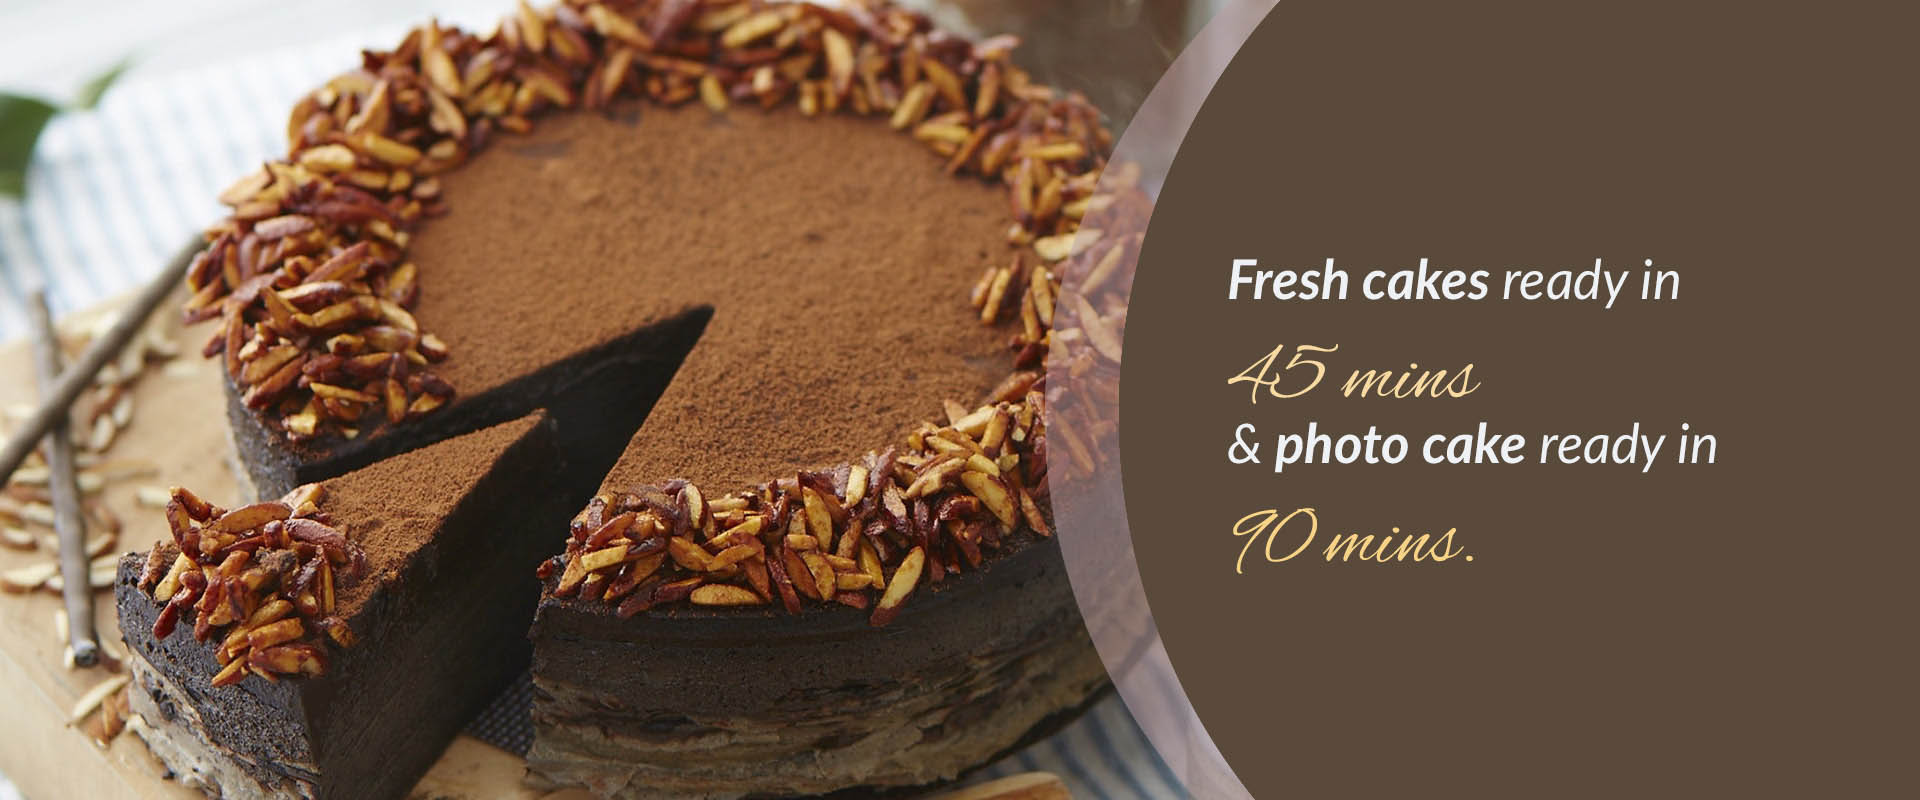 Best Top Rated Cake shop in Thane, Maharashtra, India | Yappe.in